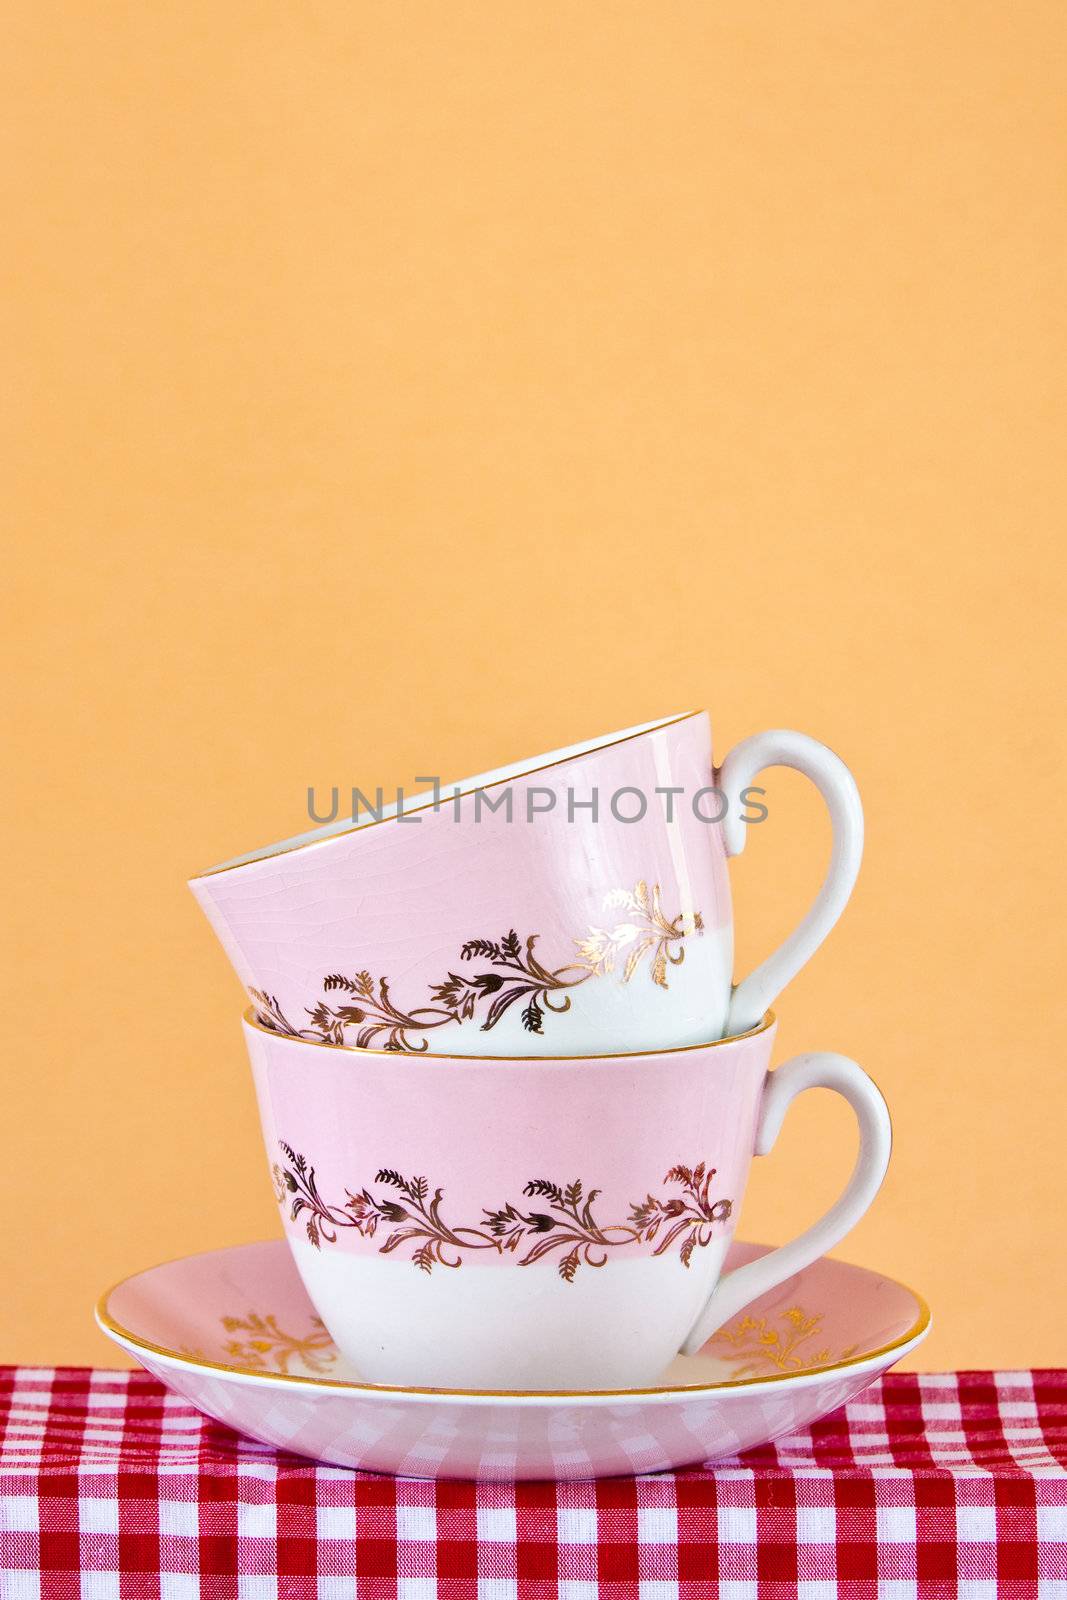 Two retro style teacups on gingham cloth by trgowanlock